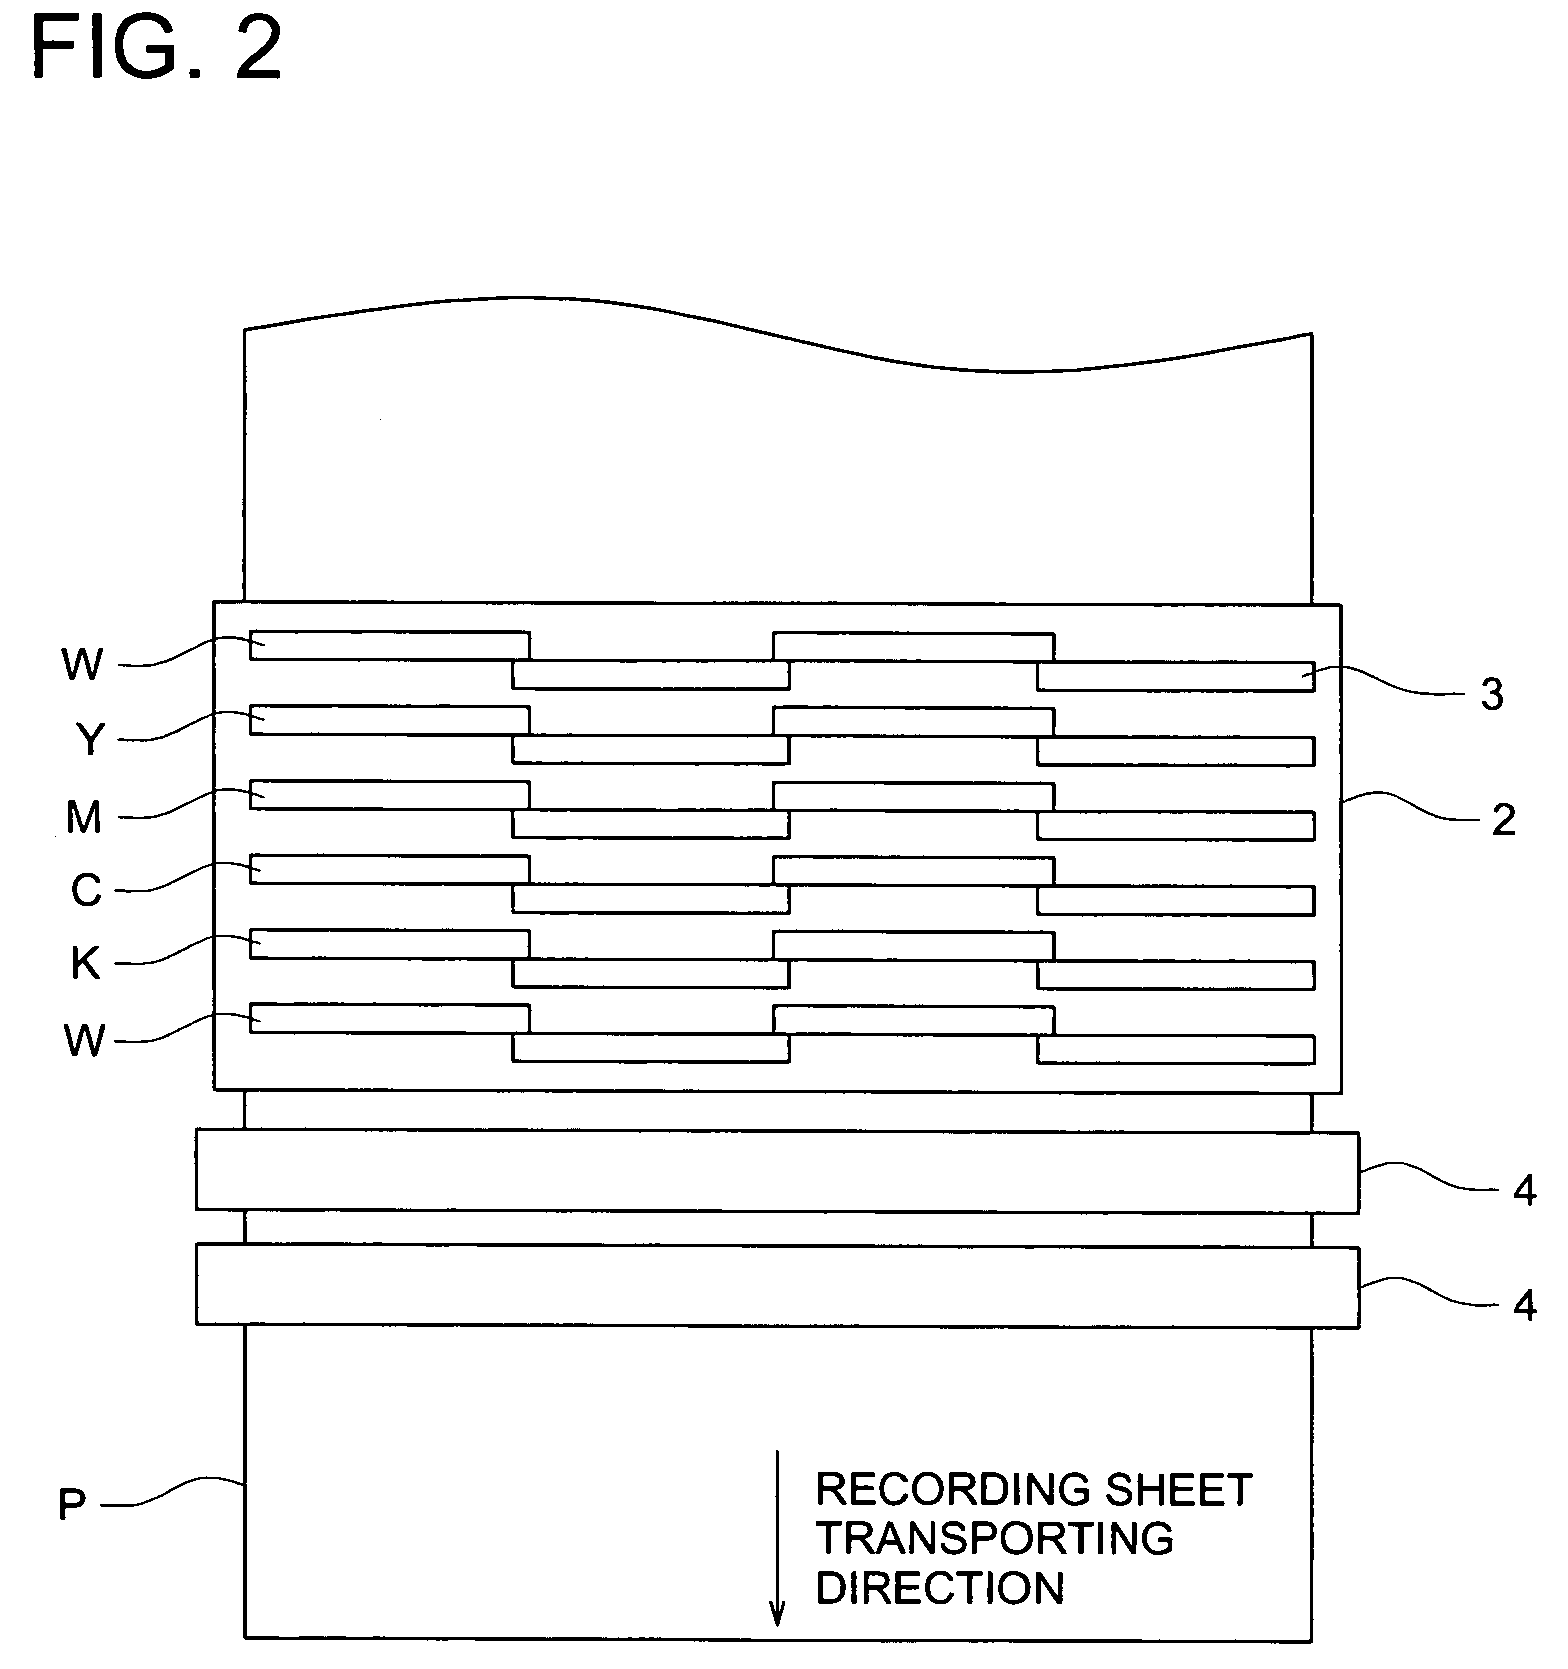 Photocurable ink-jet ink, ink-jet image forming method and ink-jet recording apparatus using the same